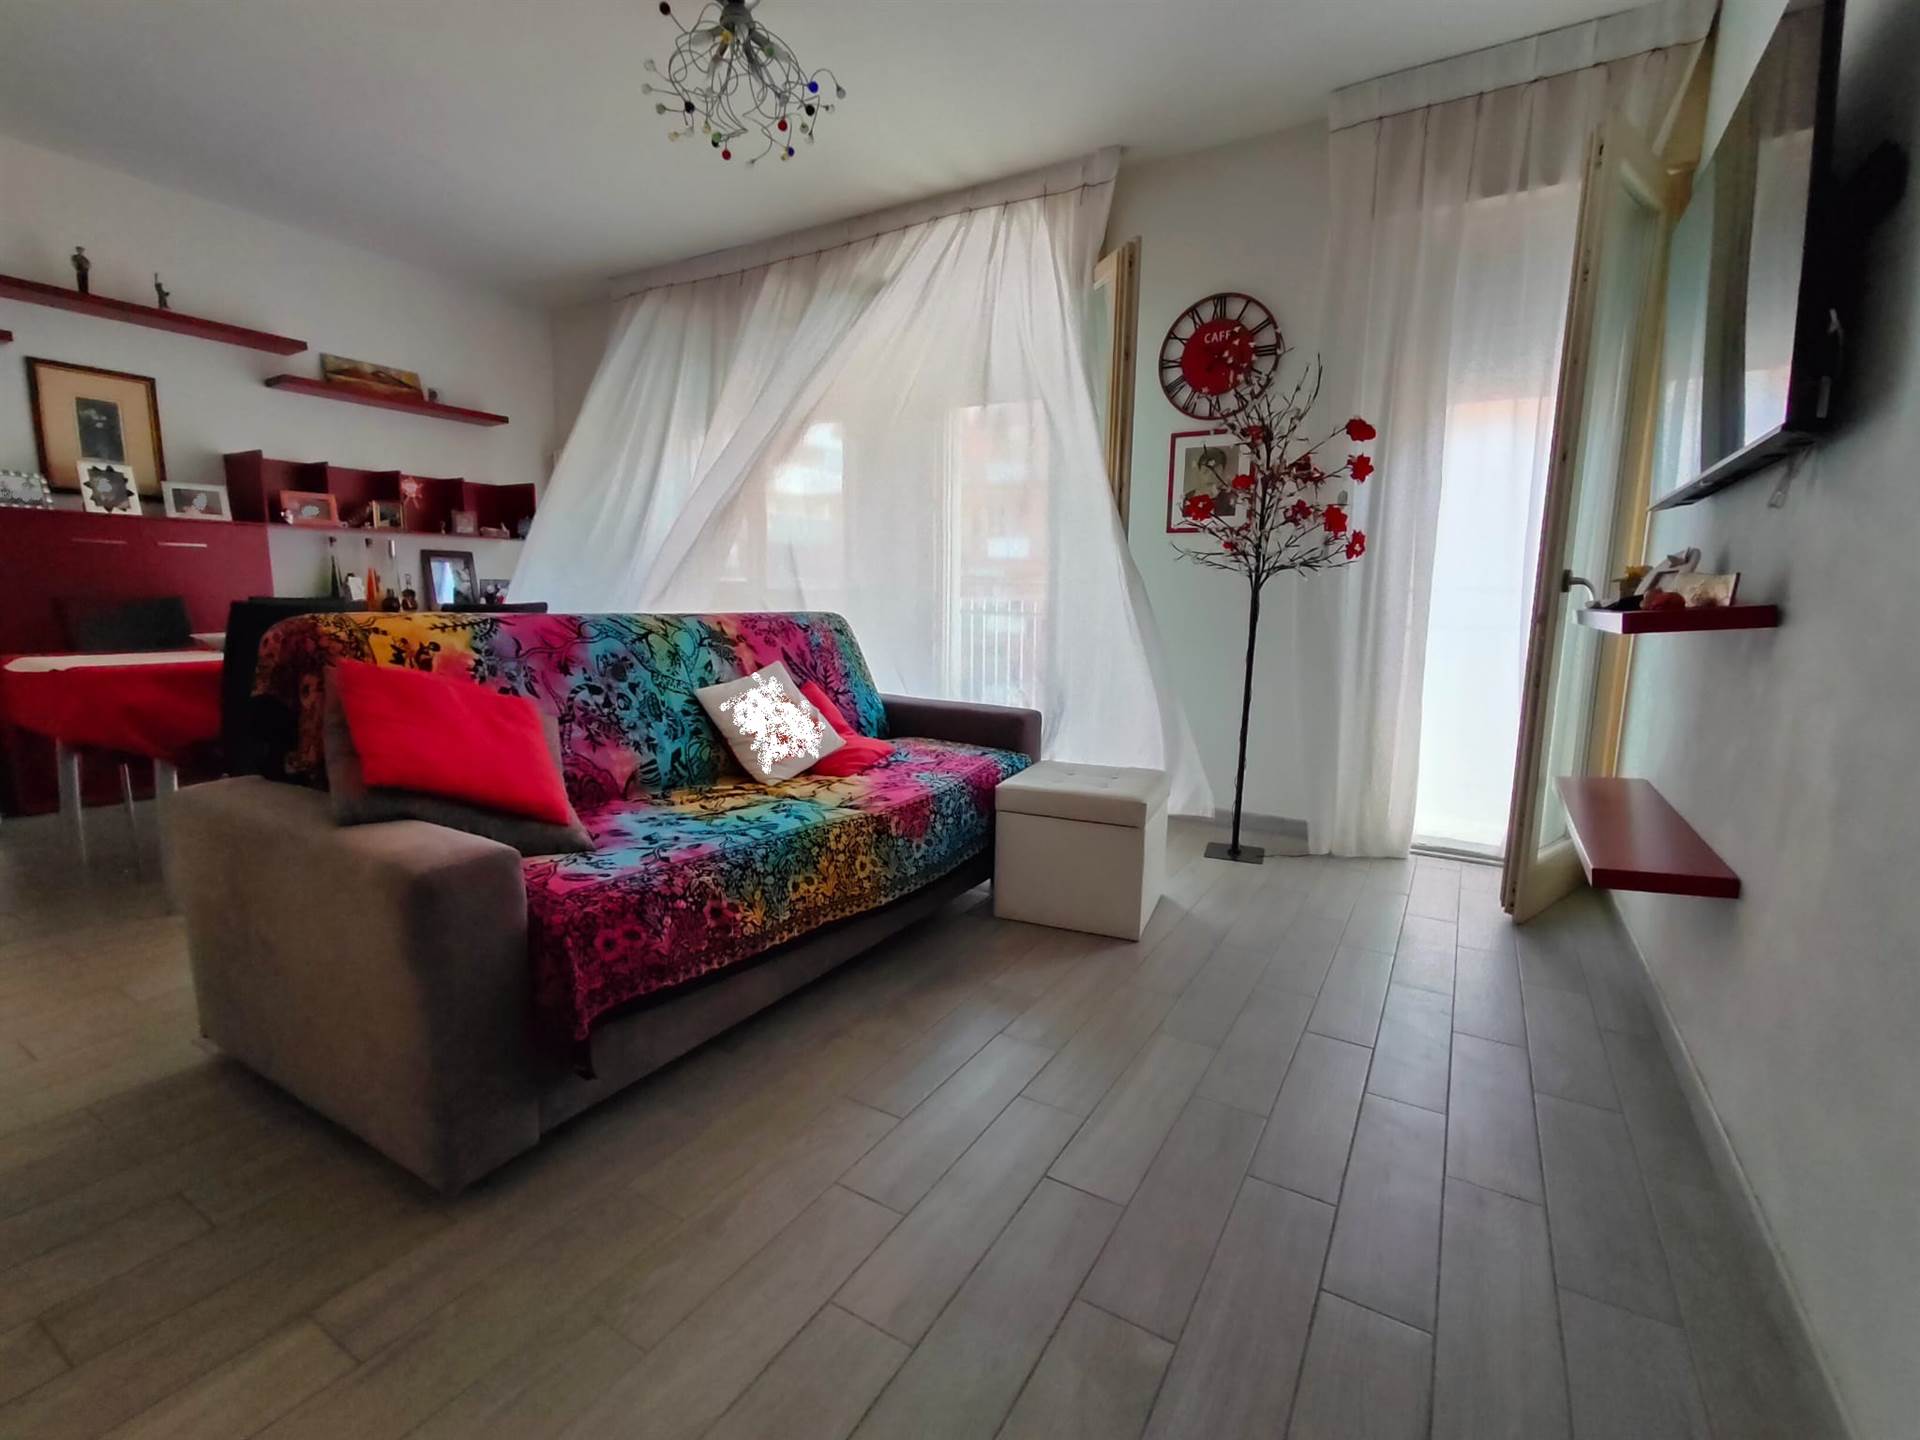 SOTTOMARINA, CHIOGGIA, Apartment for sale of 76 Sq. mt., Restored, Heating Individual heating system, Energetic class: D, placed at 2° on 4, composed 